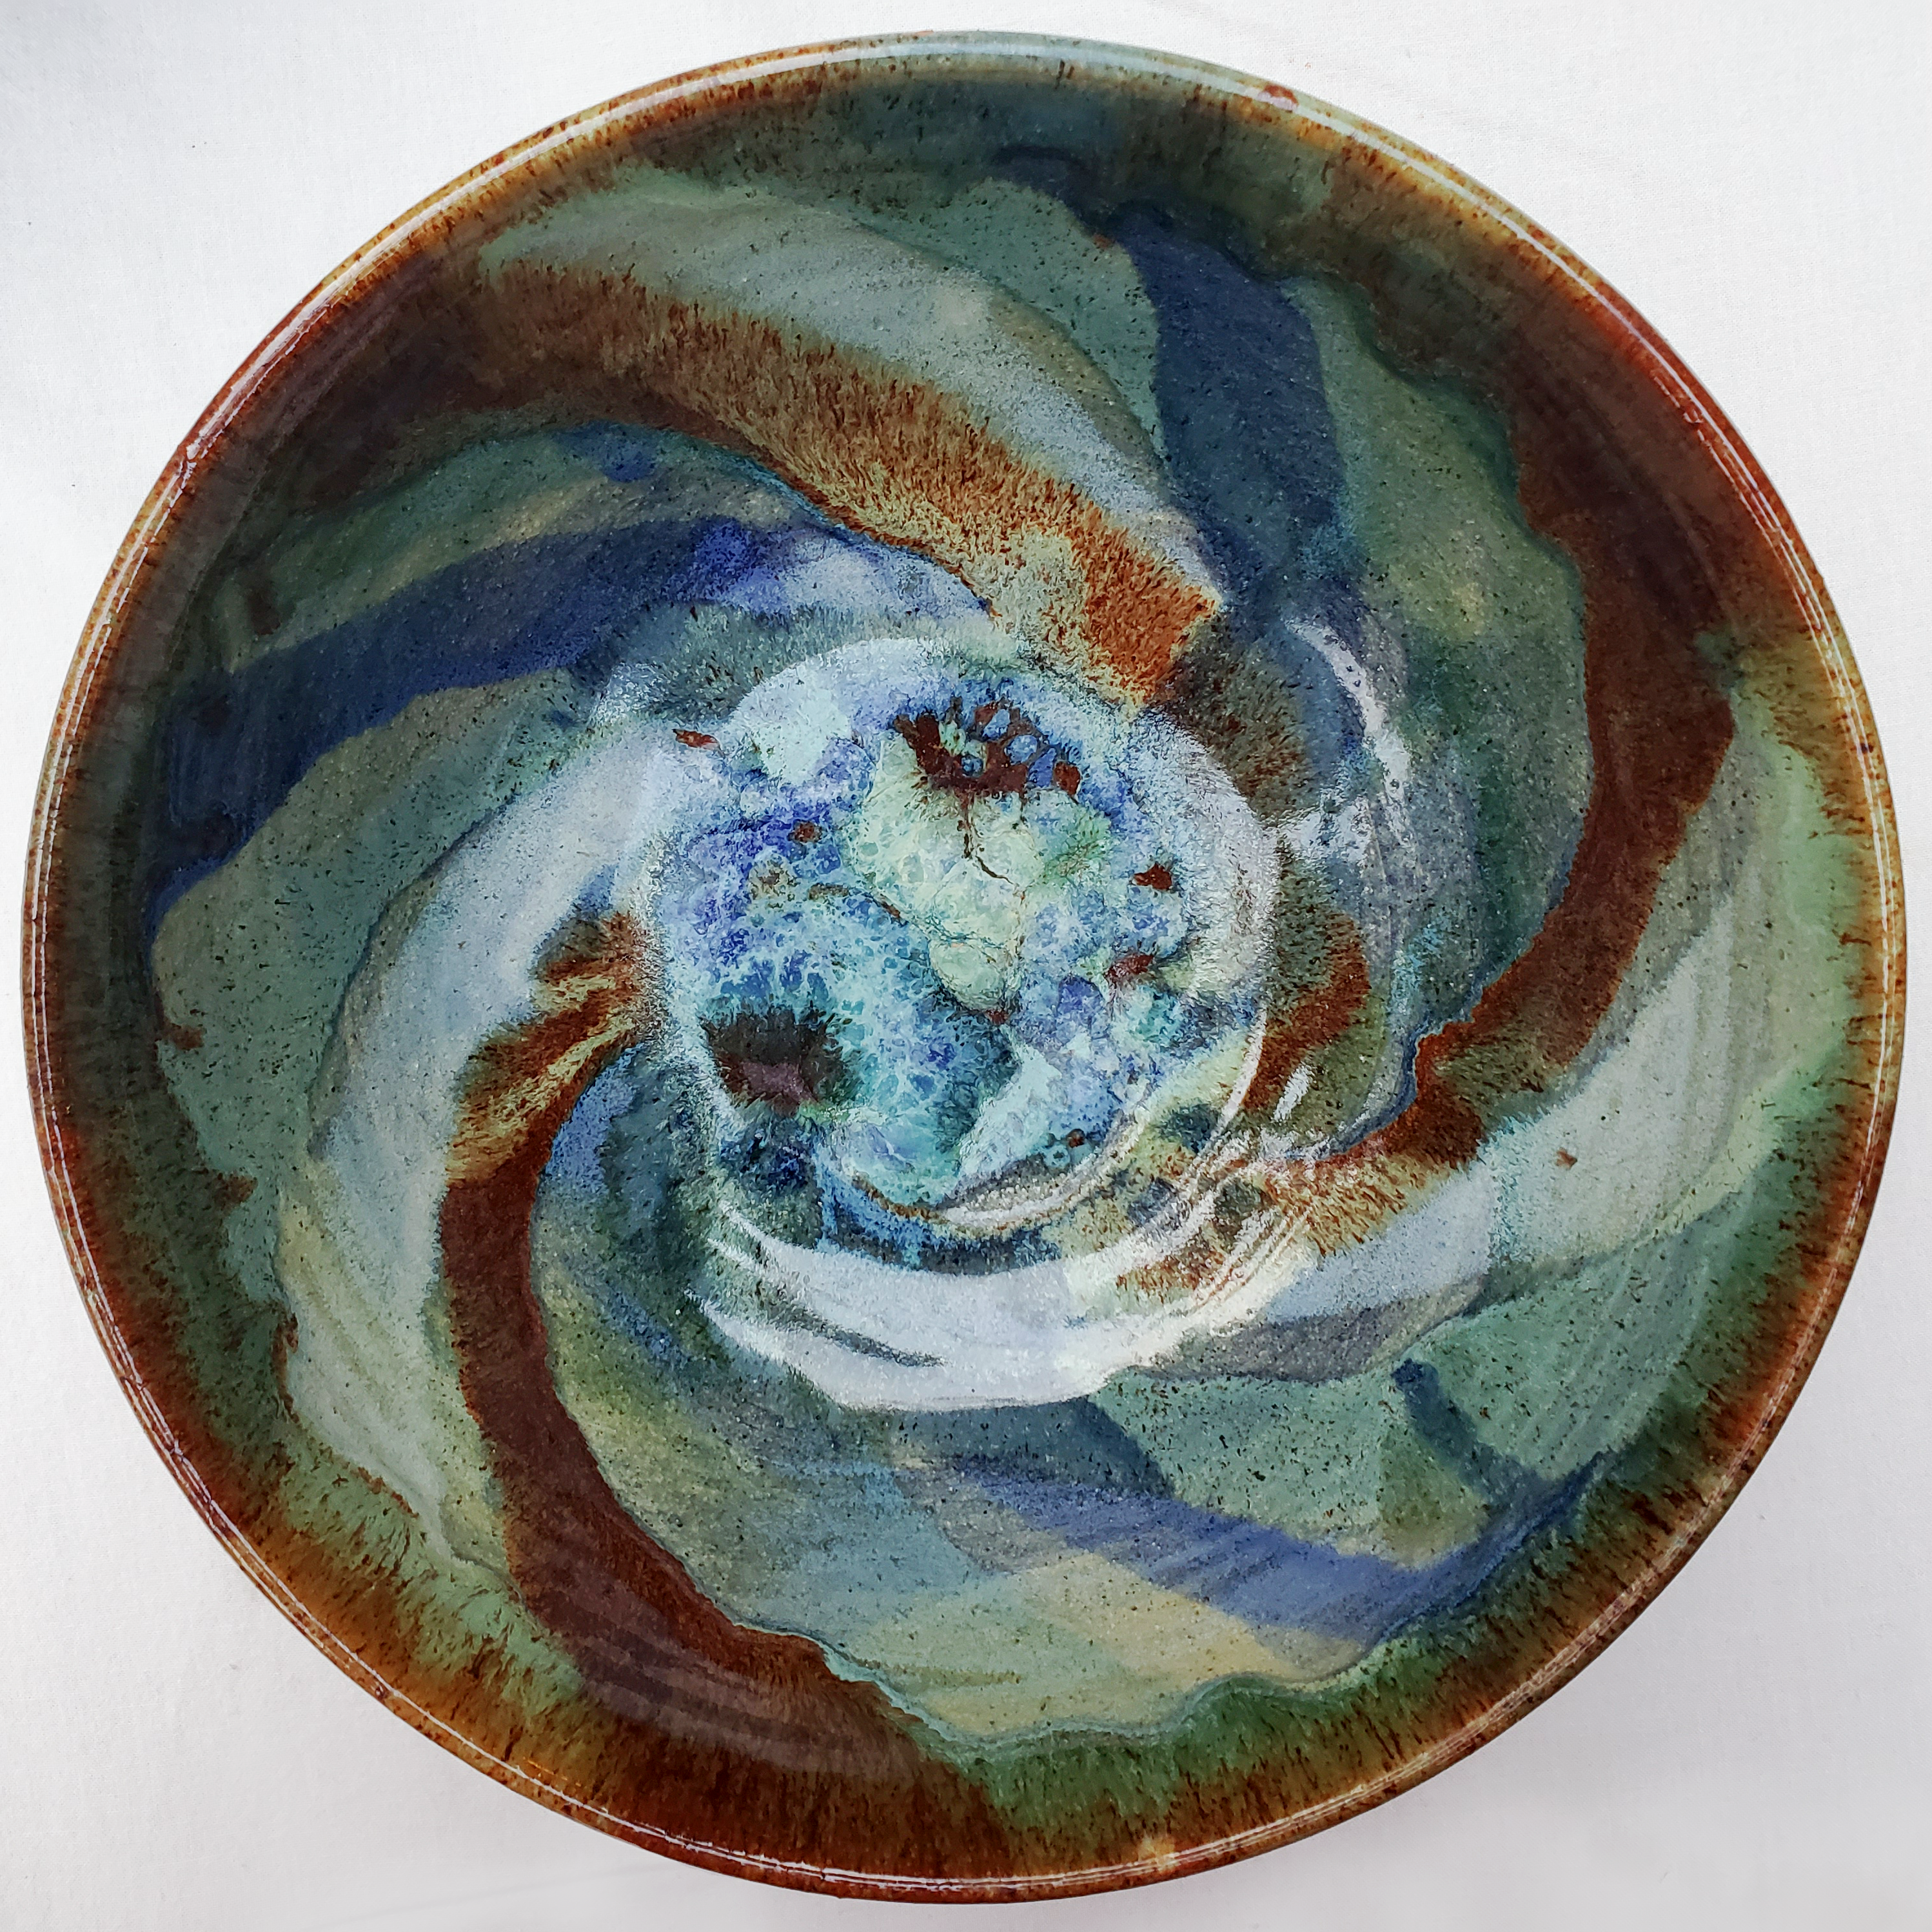 Beautiful bowls glazed with a galaxy swirl in blues, greens, yellows, browns, and reds. Handmade on Vashon Island by Abraham McBride Pottery. Local ceramics artist, Seattle Washington.